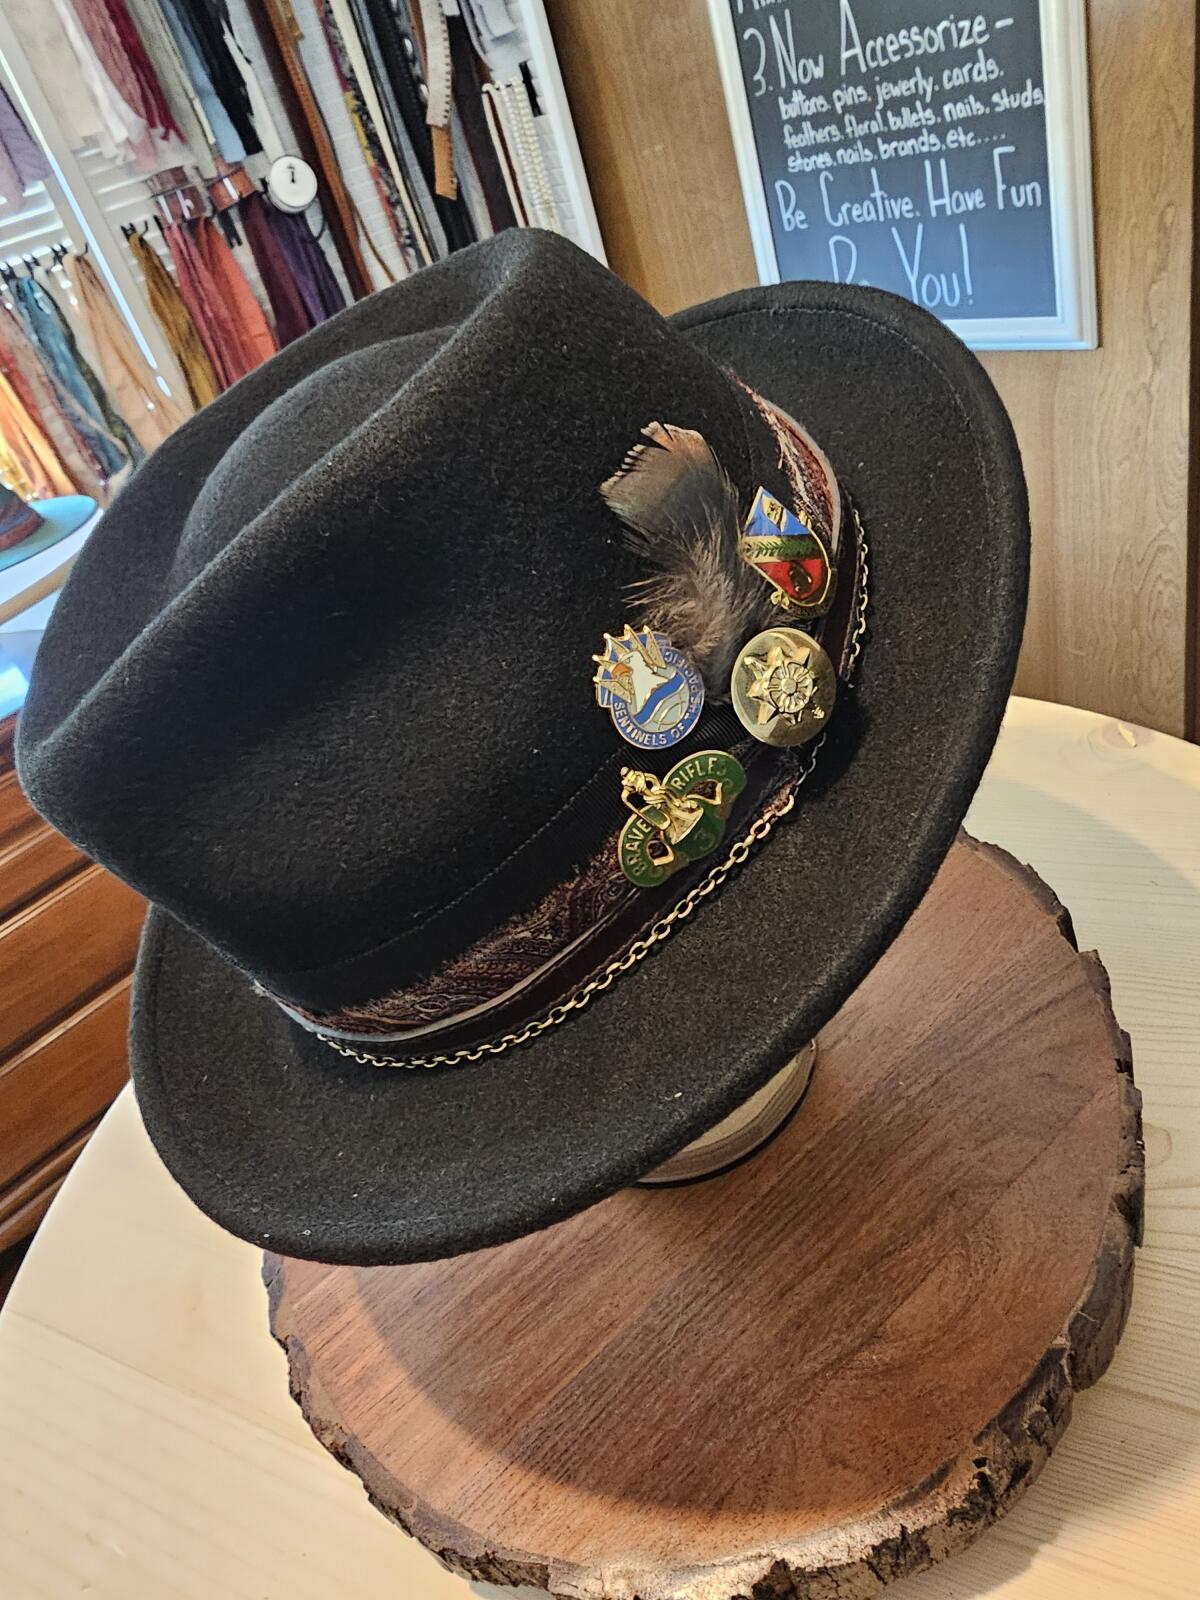 Tara Holsapple took inspiration from photographer John Hancock's collection of old military pins and used them in his hat.